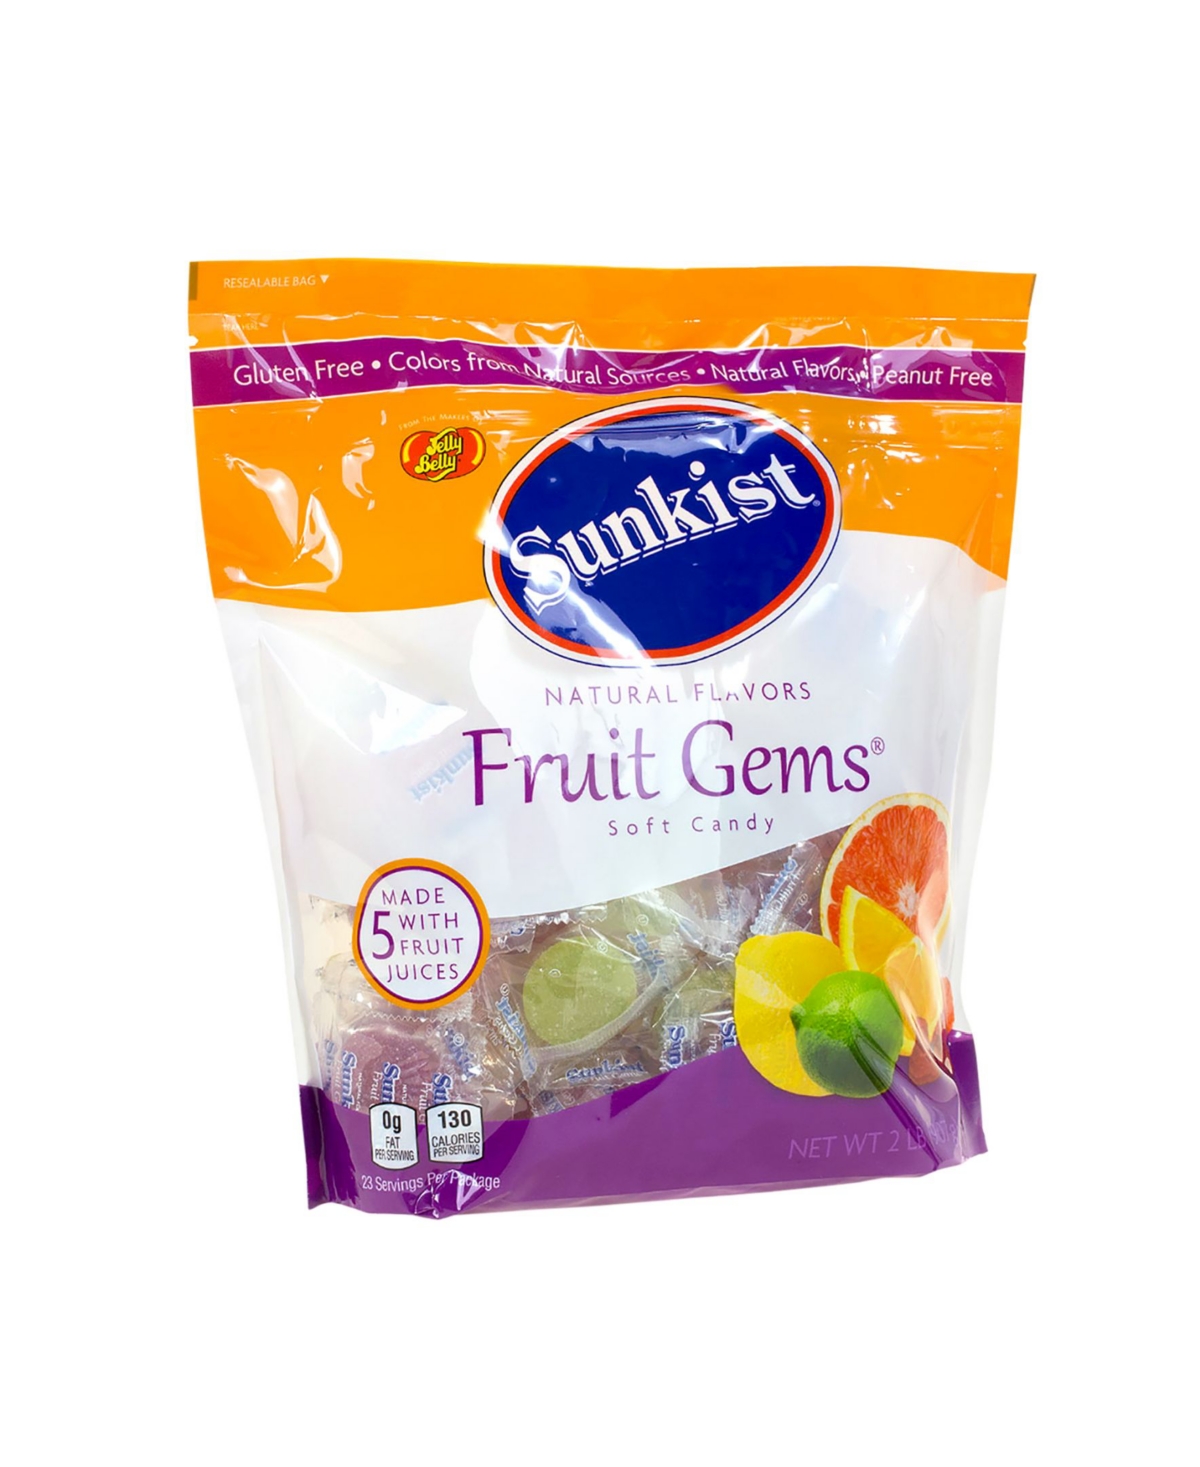 UPC 071567990257 product image for Sunkist Wrapped Fruit Gems Soft Candy, 2 lbs | upcitemdb.com